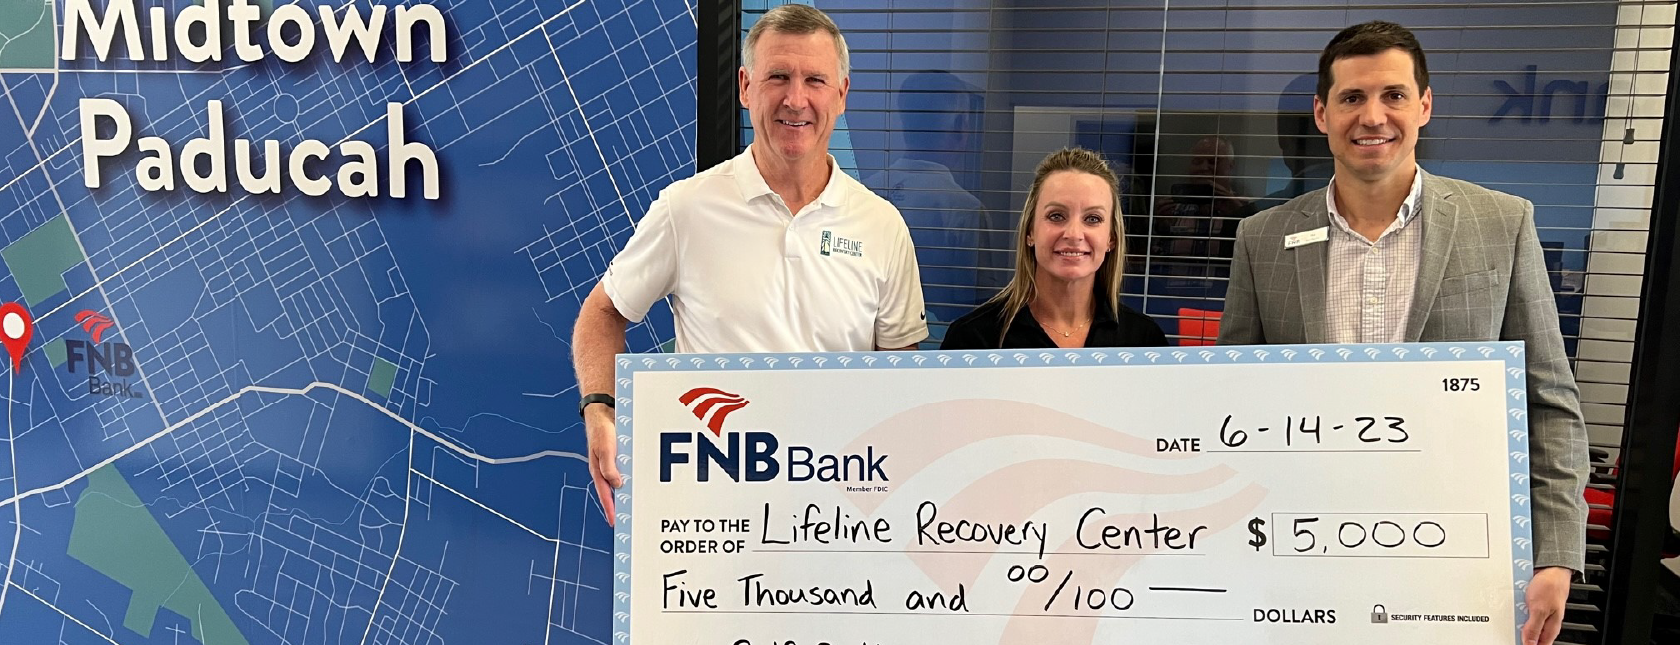 FNB BANK PROUDLY SPONSORS 14th ANNUAL LIFELINE RECOVERY CENTER GOLF OUTING